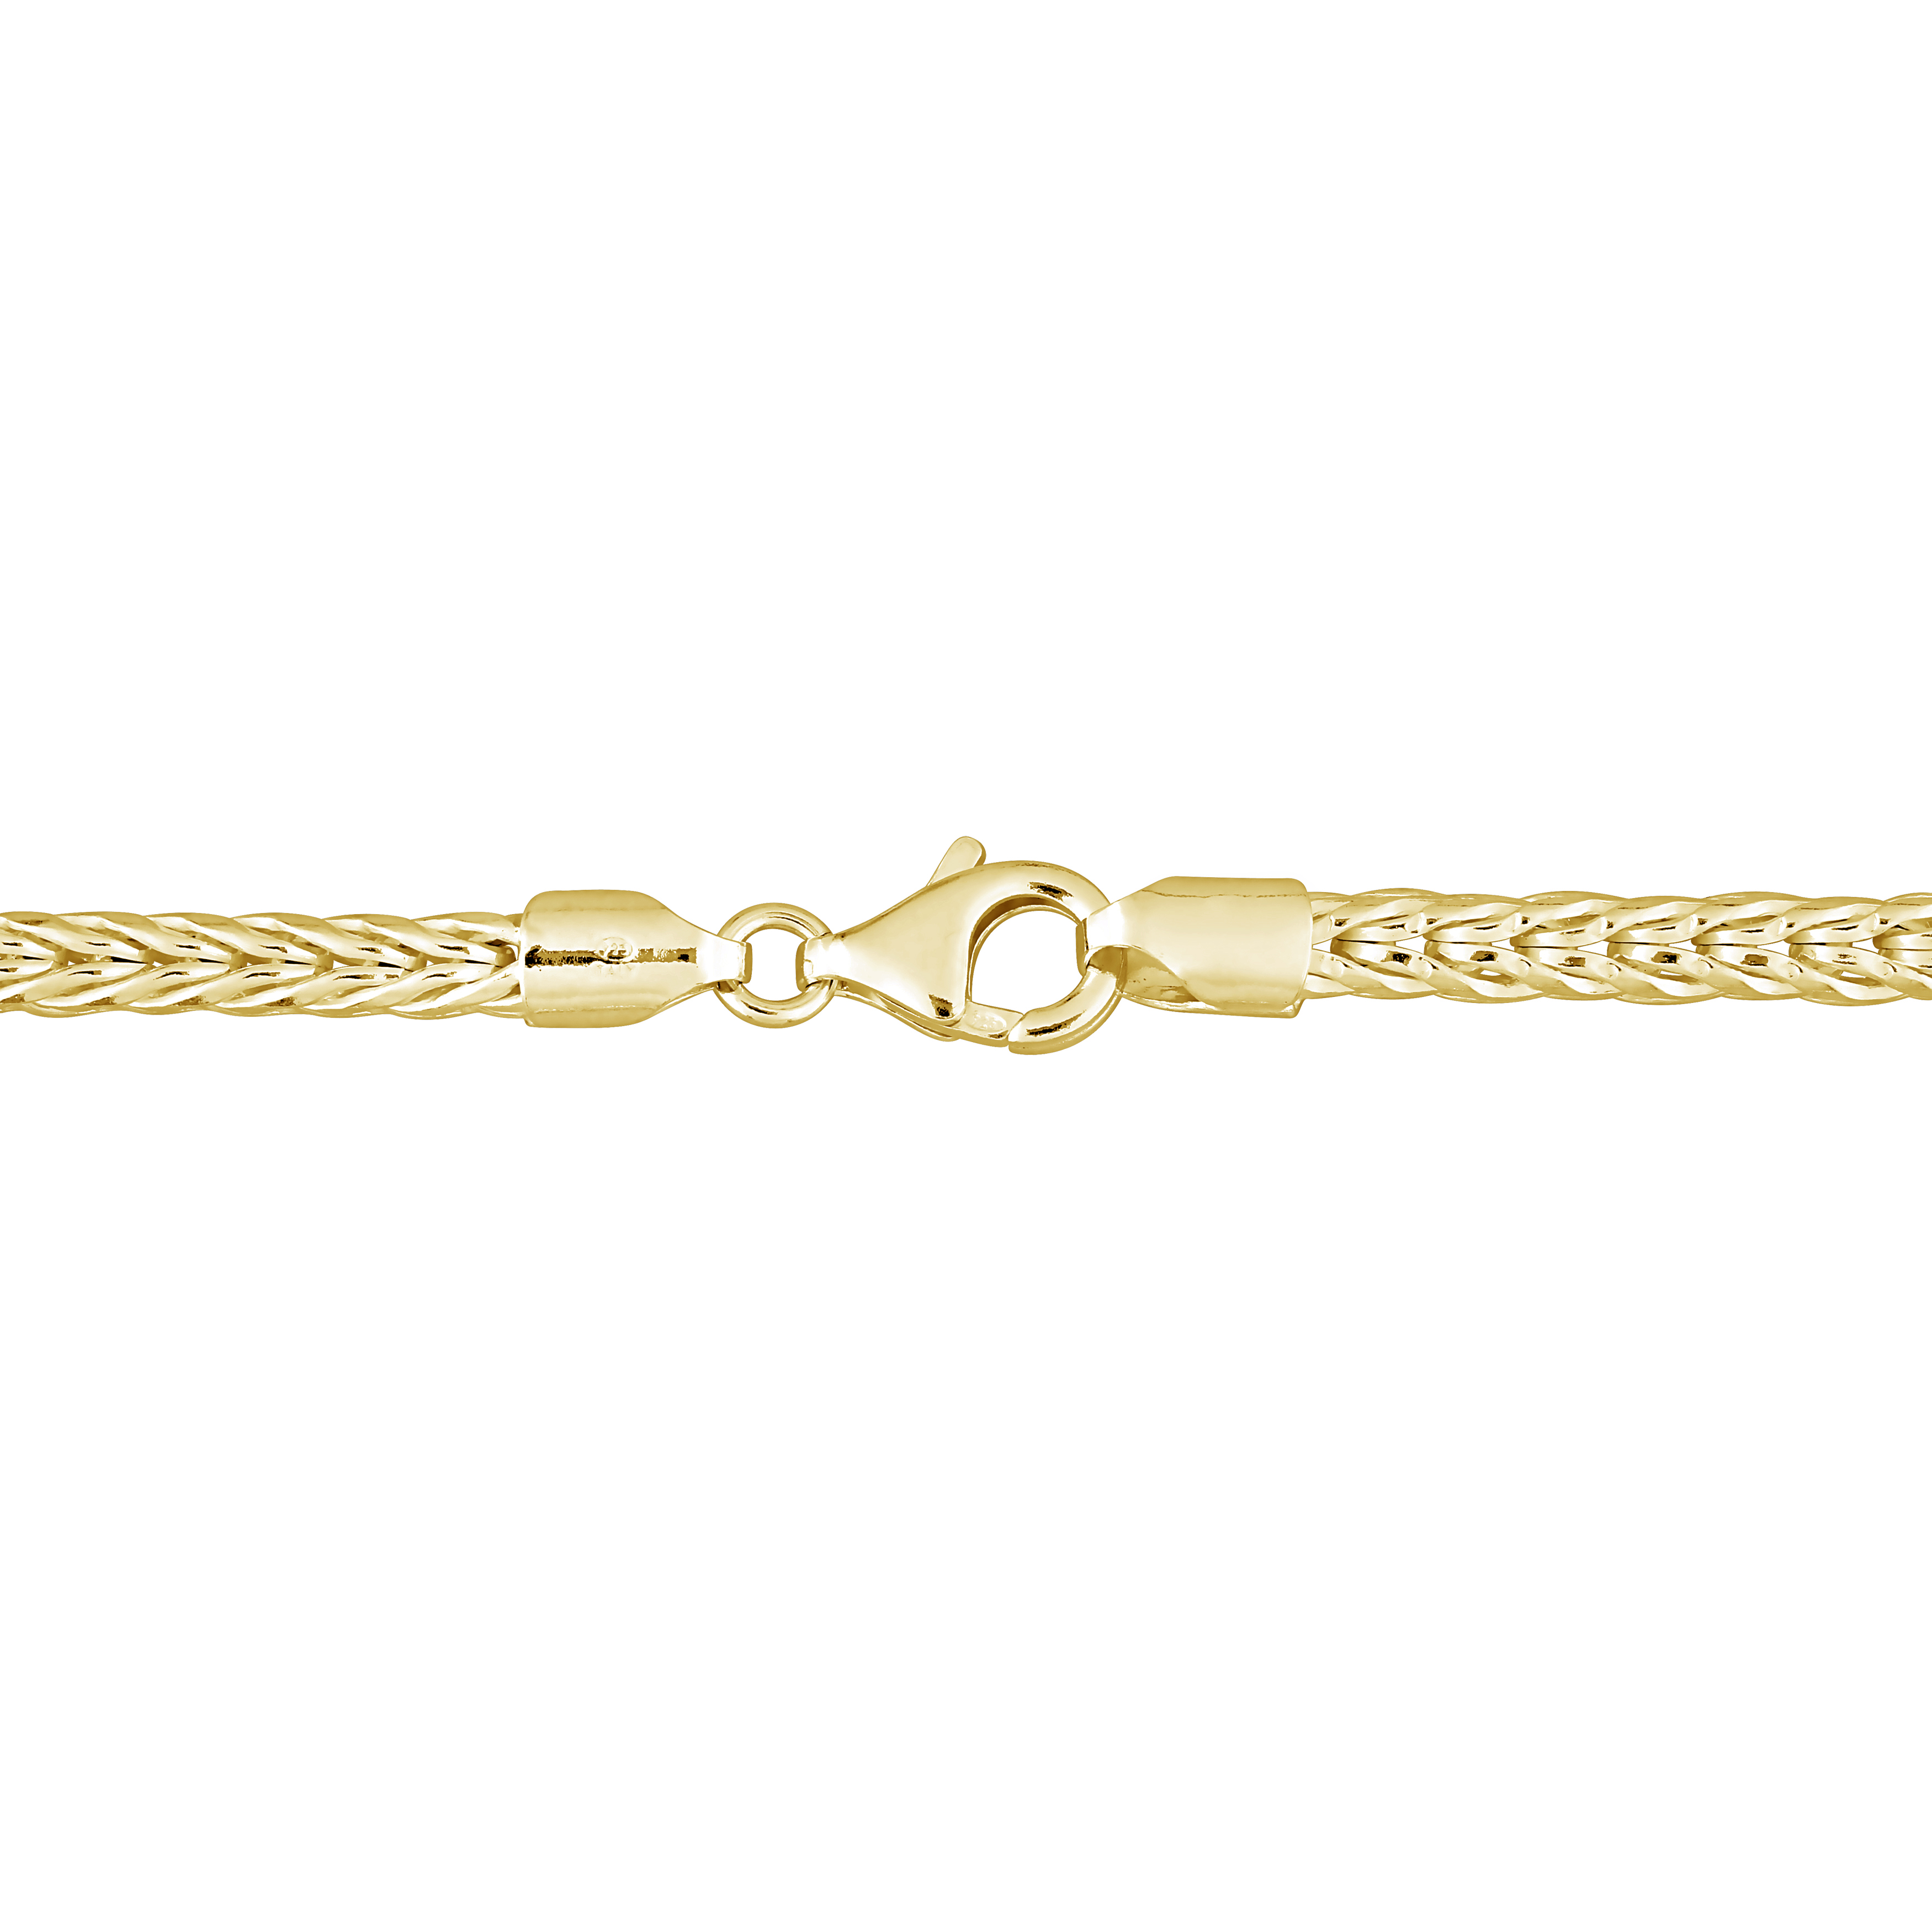 4.2mm Foxtail Chain Bracelet in 18k Yellow Gold Plated Sterling Silver - 9 in.